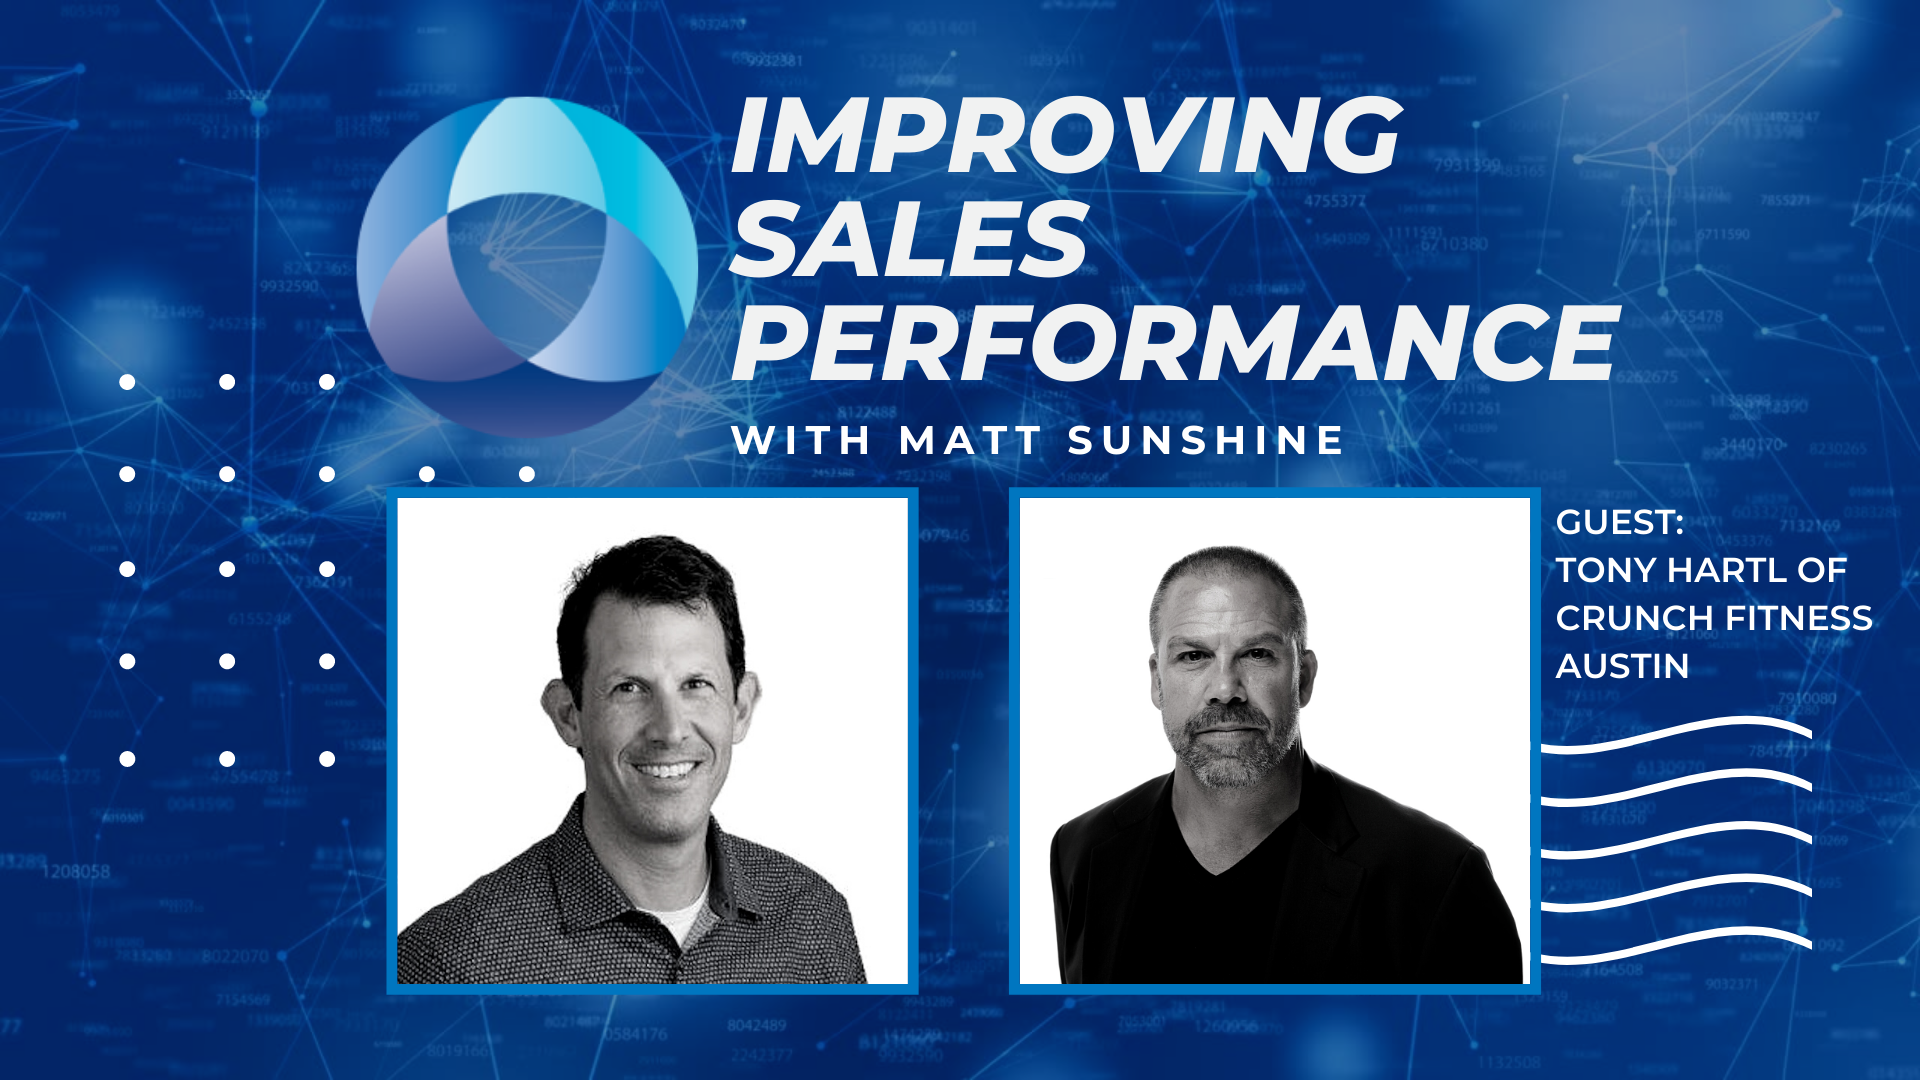 Improving Sales Performance: Business Performance and Culture